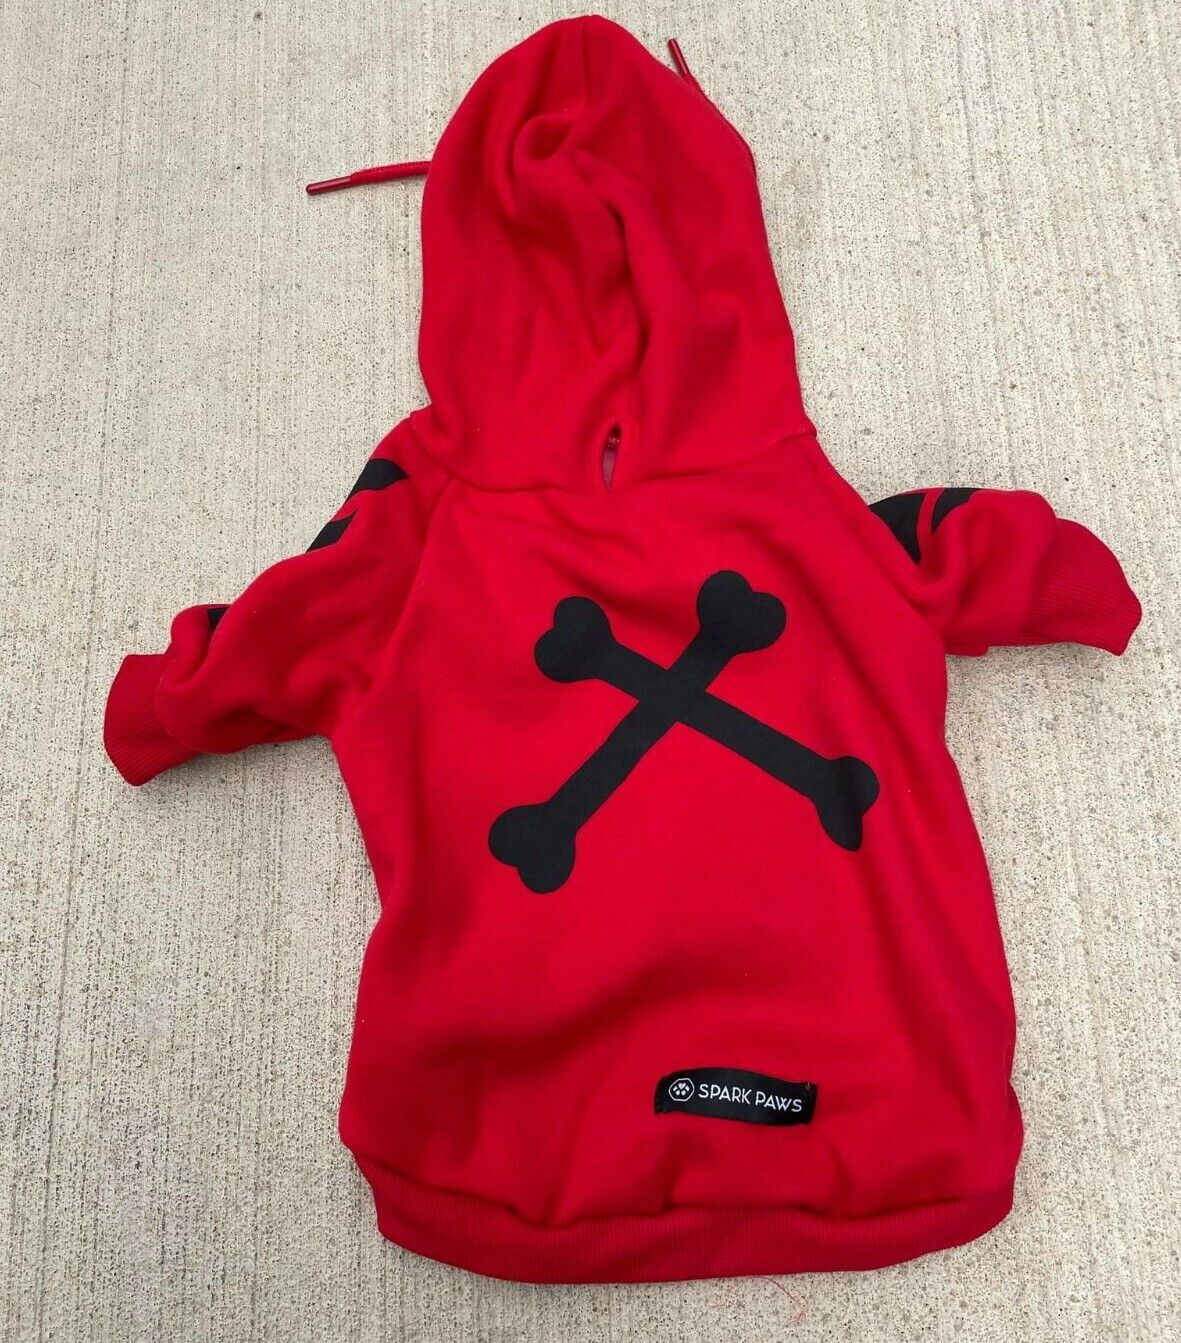 Max 67% OFF Max 46% OFF Spark Paws Red Fleece Hoodie Size Large